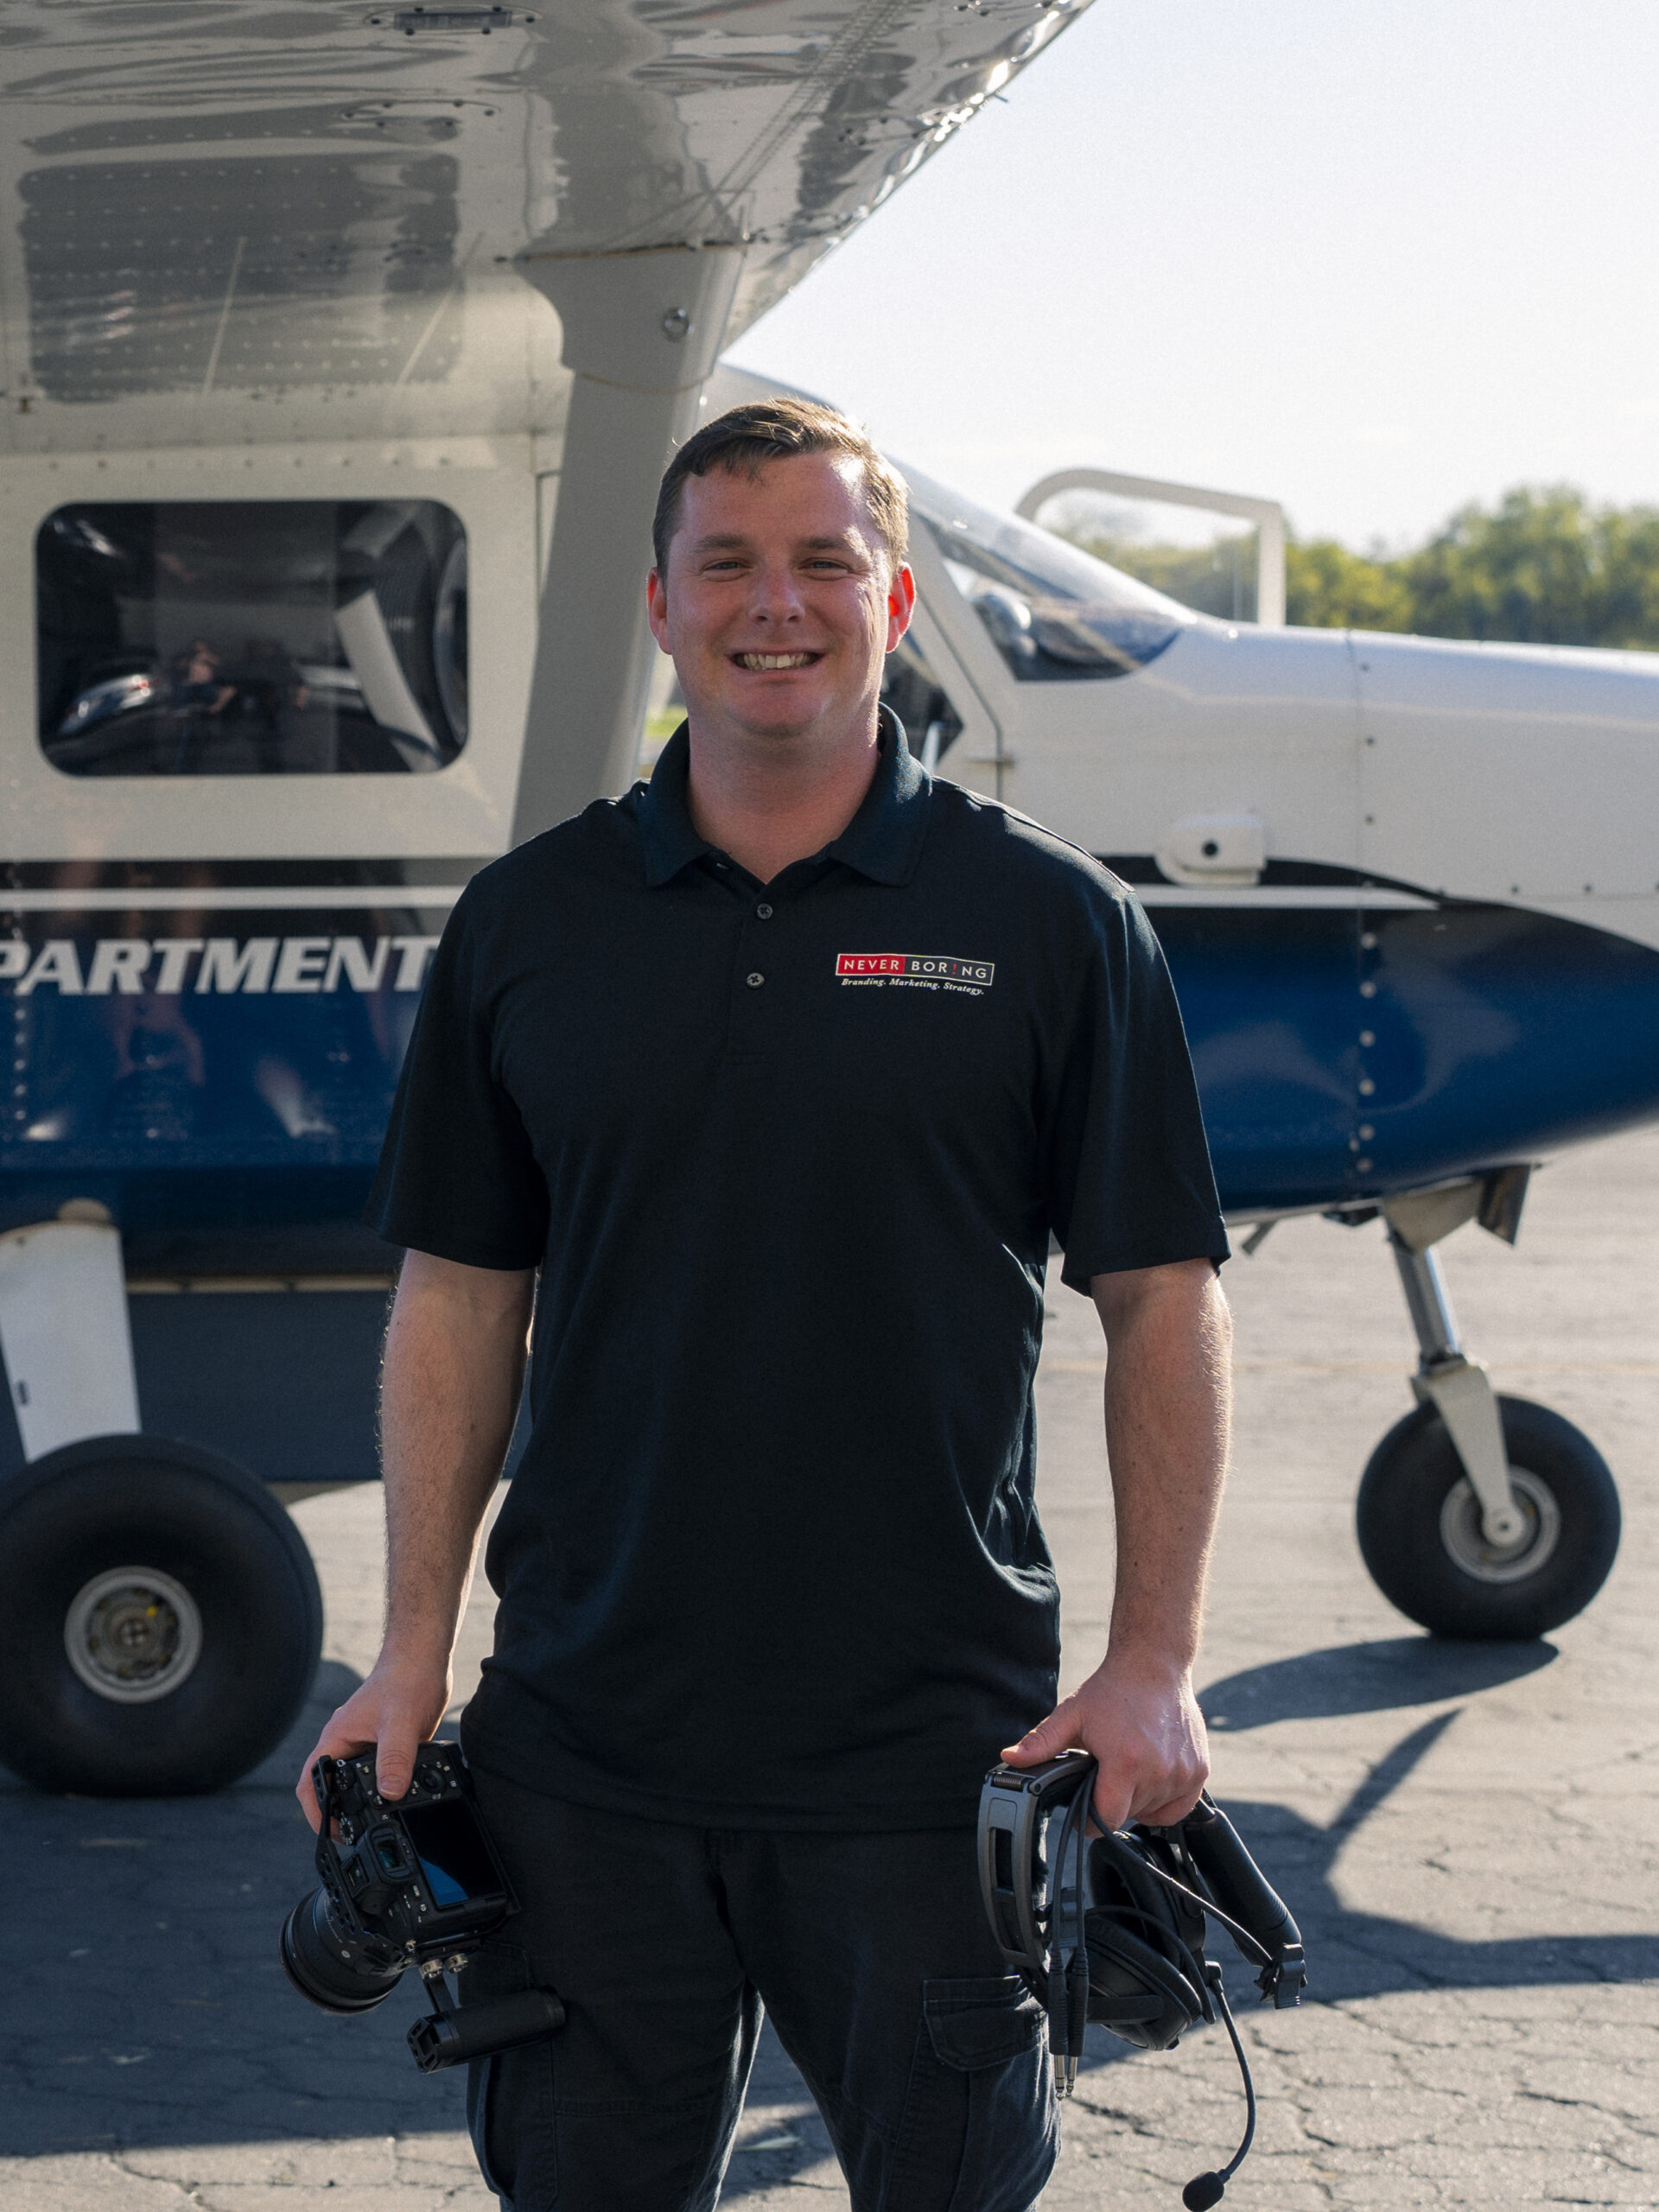 Aaron Davis, Film Specialist standing in front of a small plane holding camera equipment